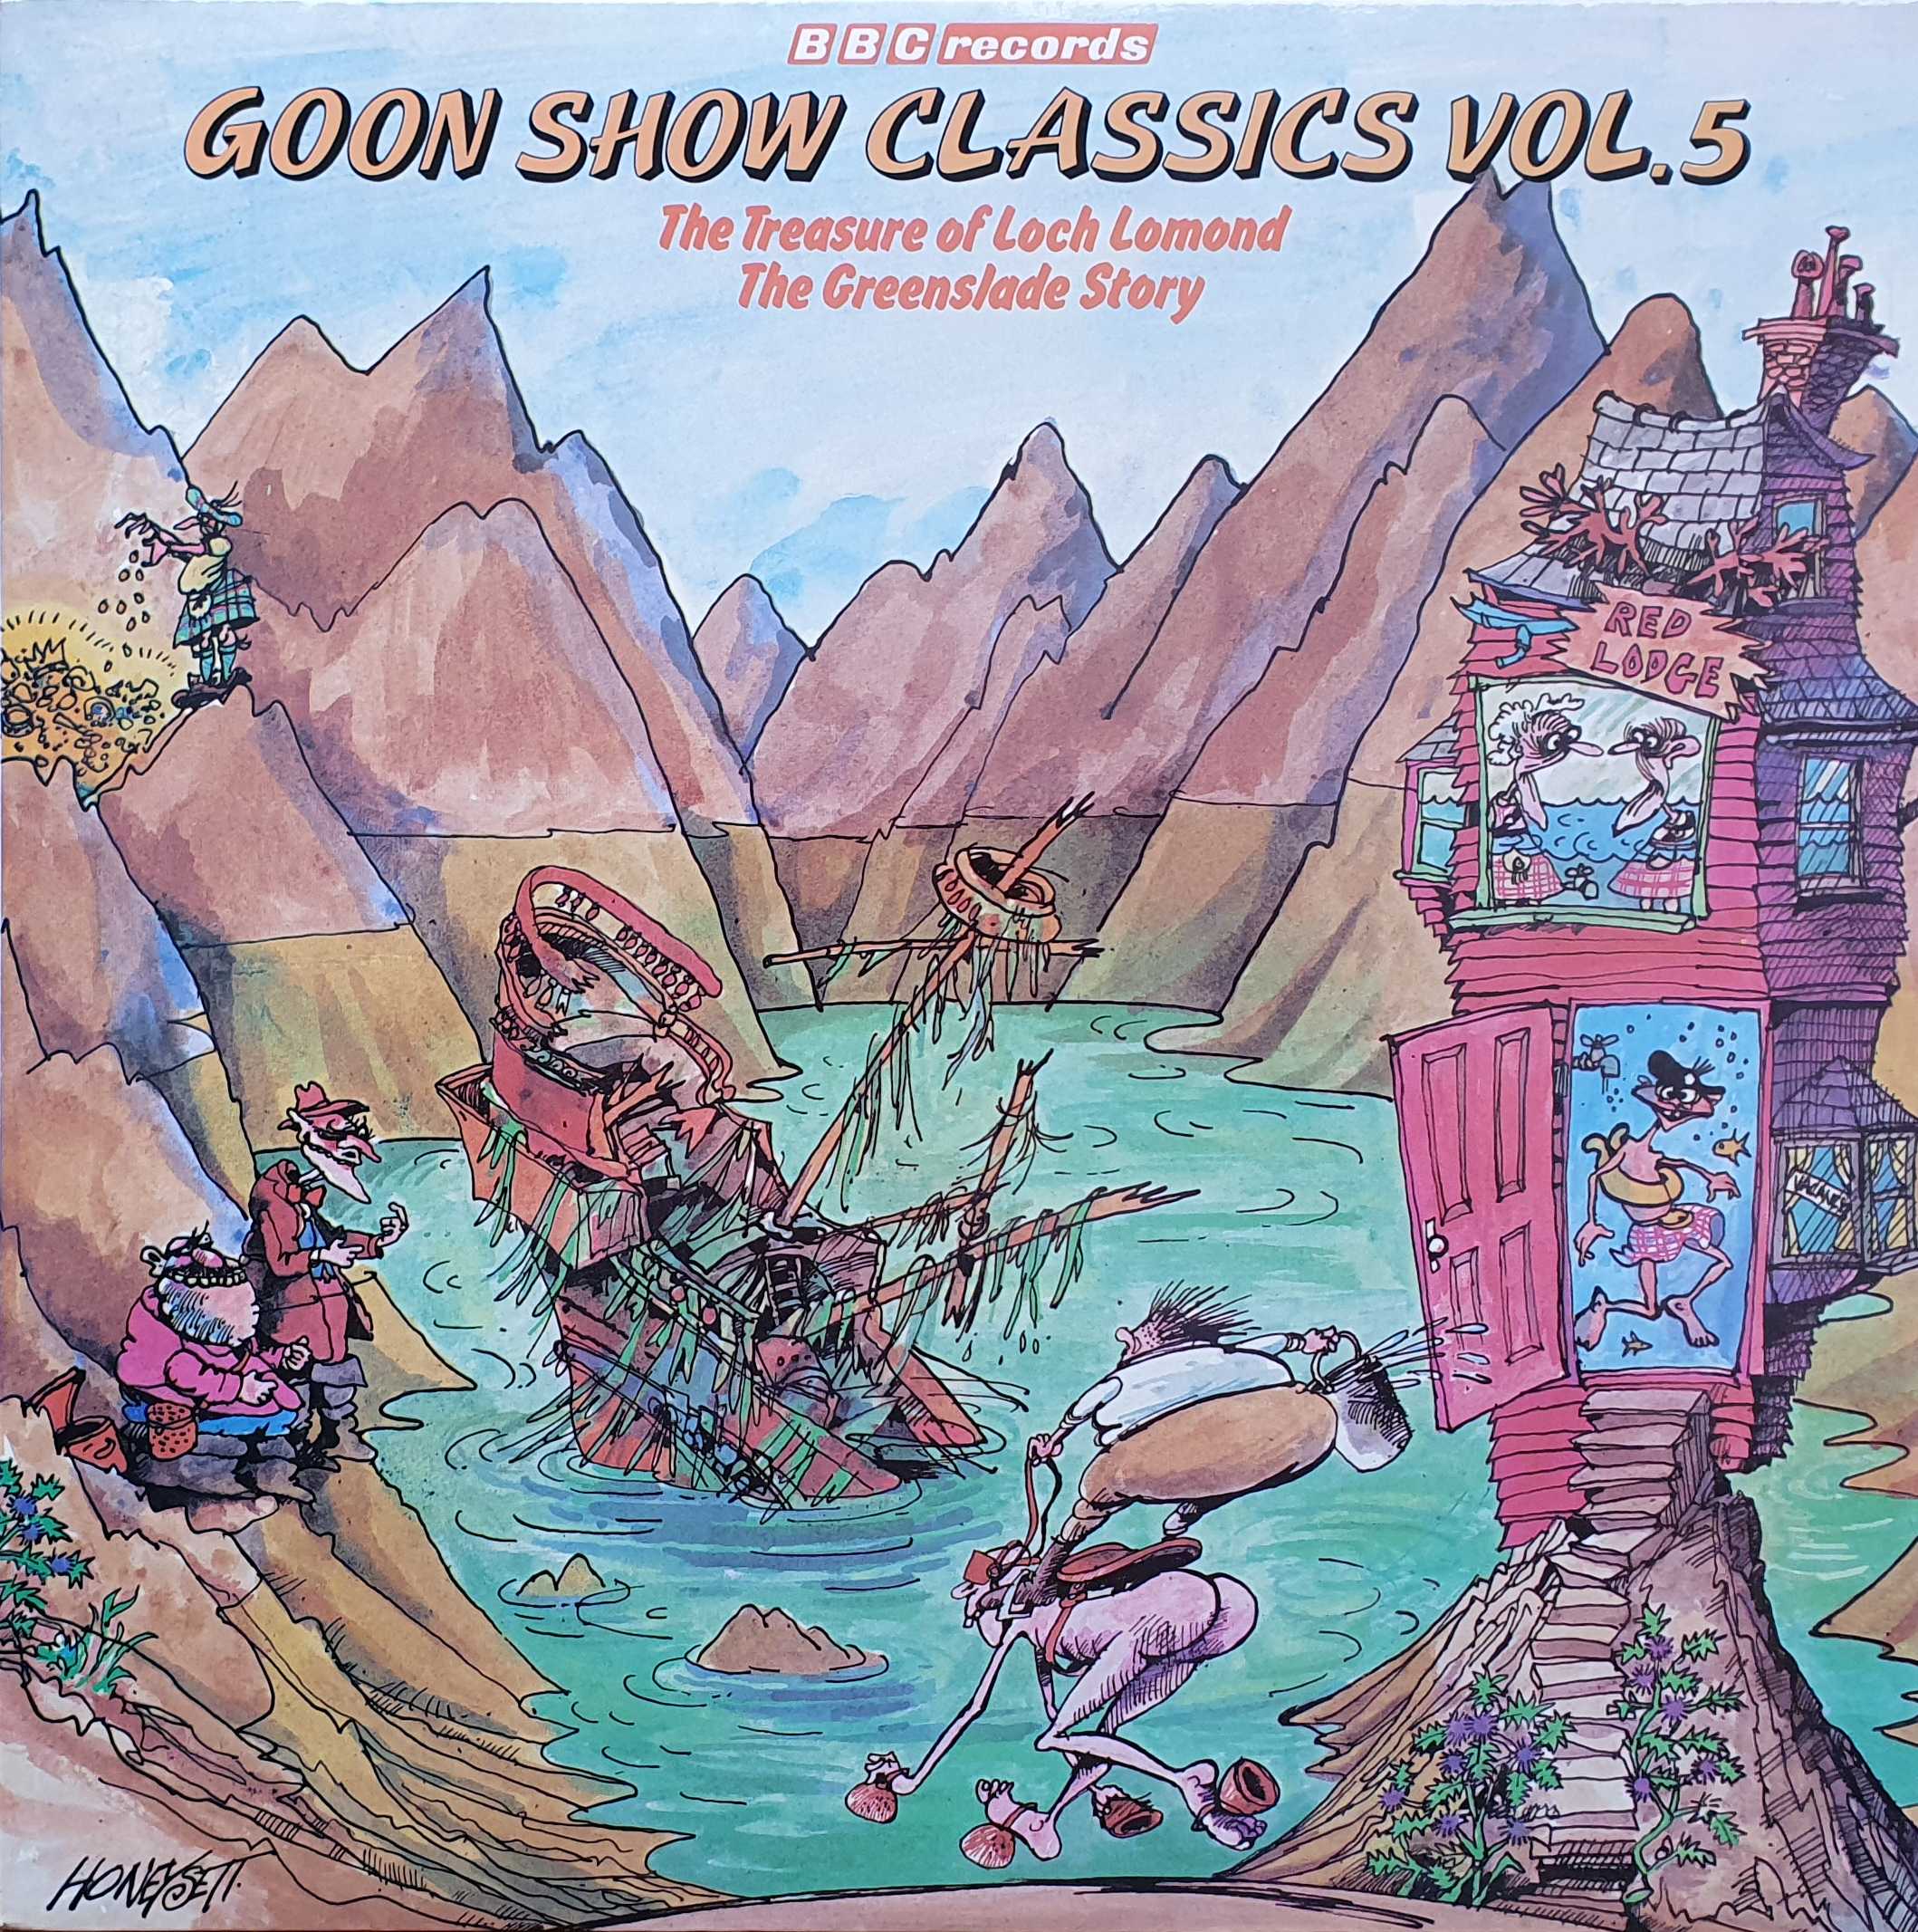 Picture of 2964 049 Goon Show classics vol. 5 by artist The Goon Show from the BBC albums - Records and Tapes library